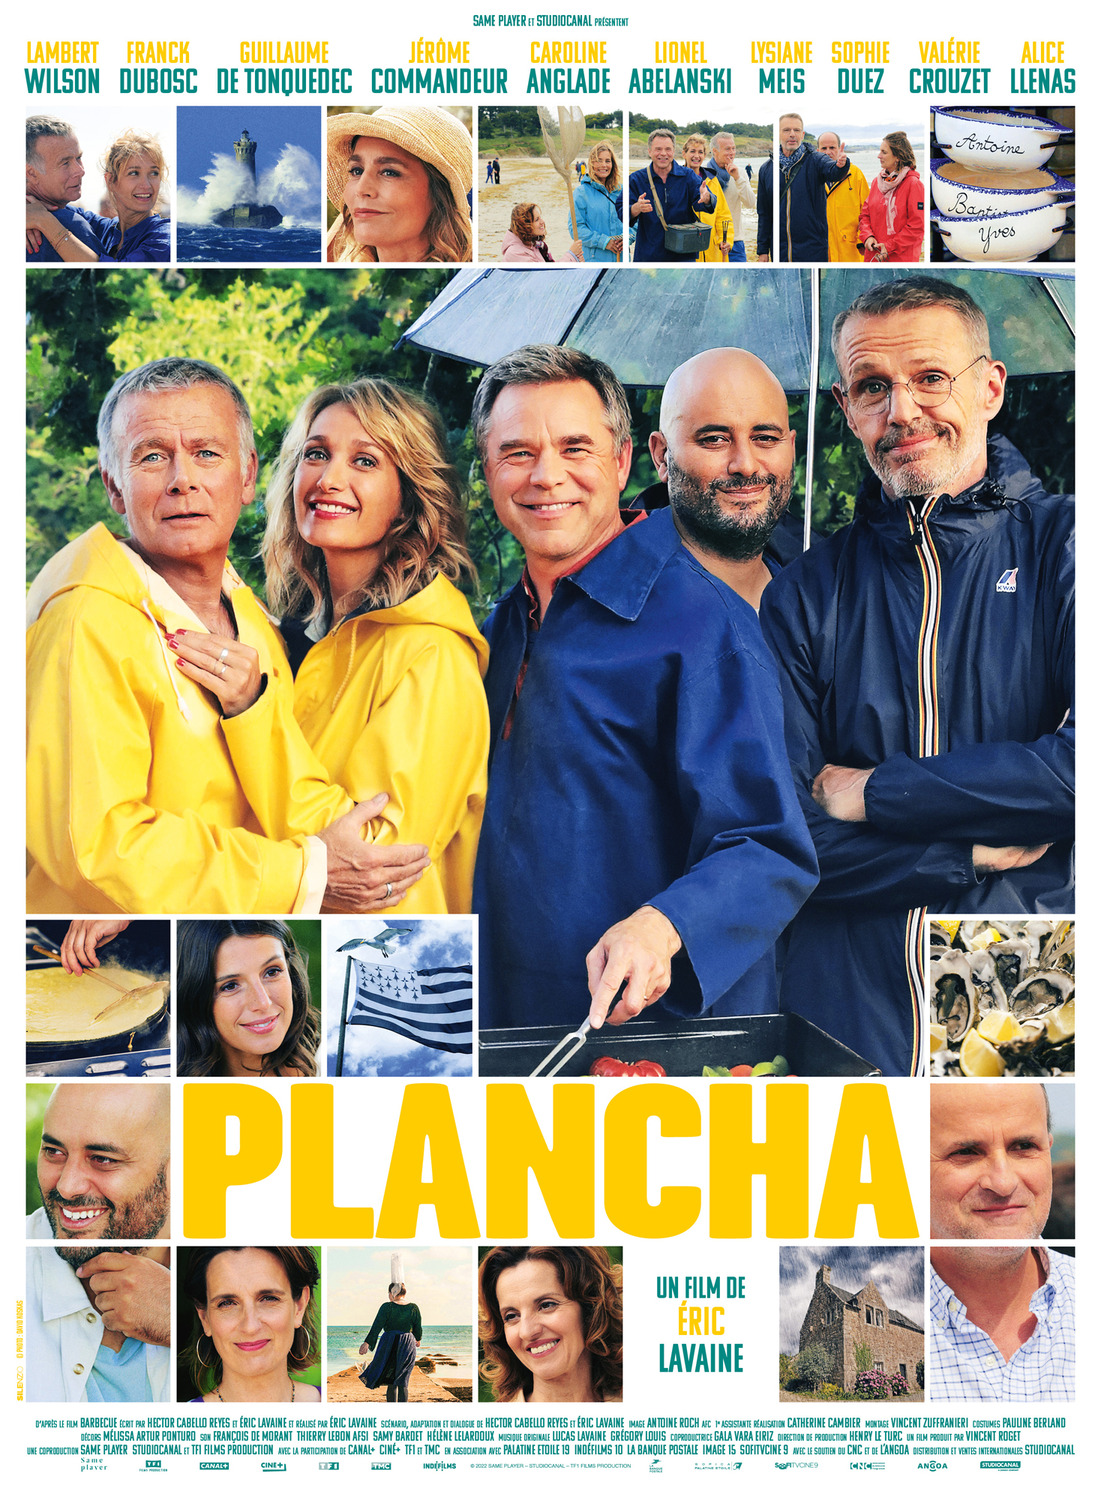 Extra Large Movie Poster Image for Plancha 